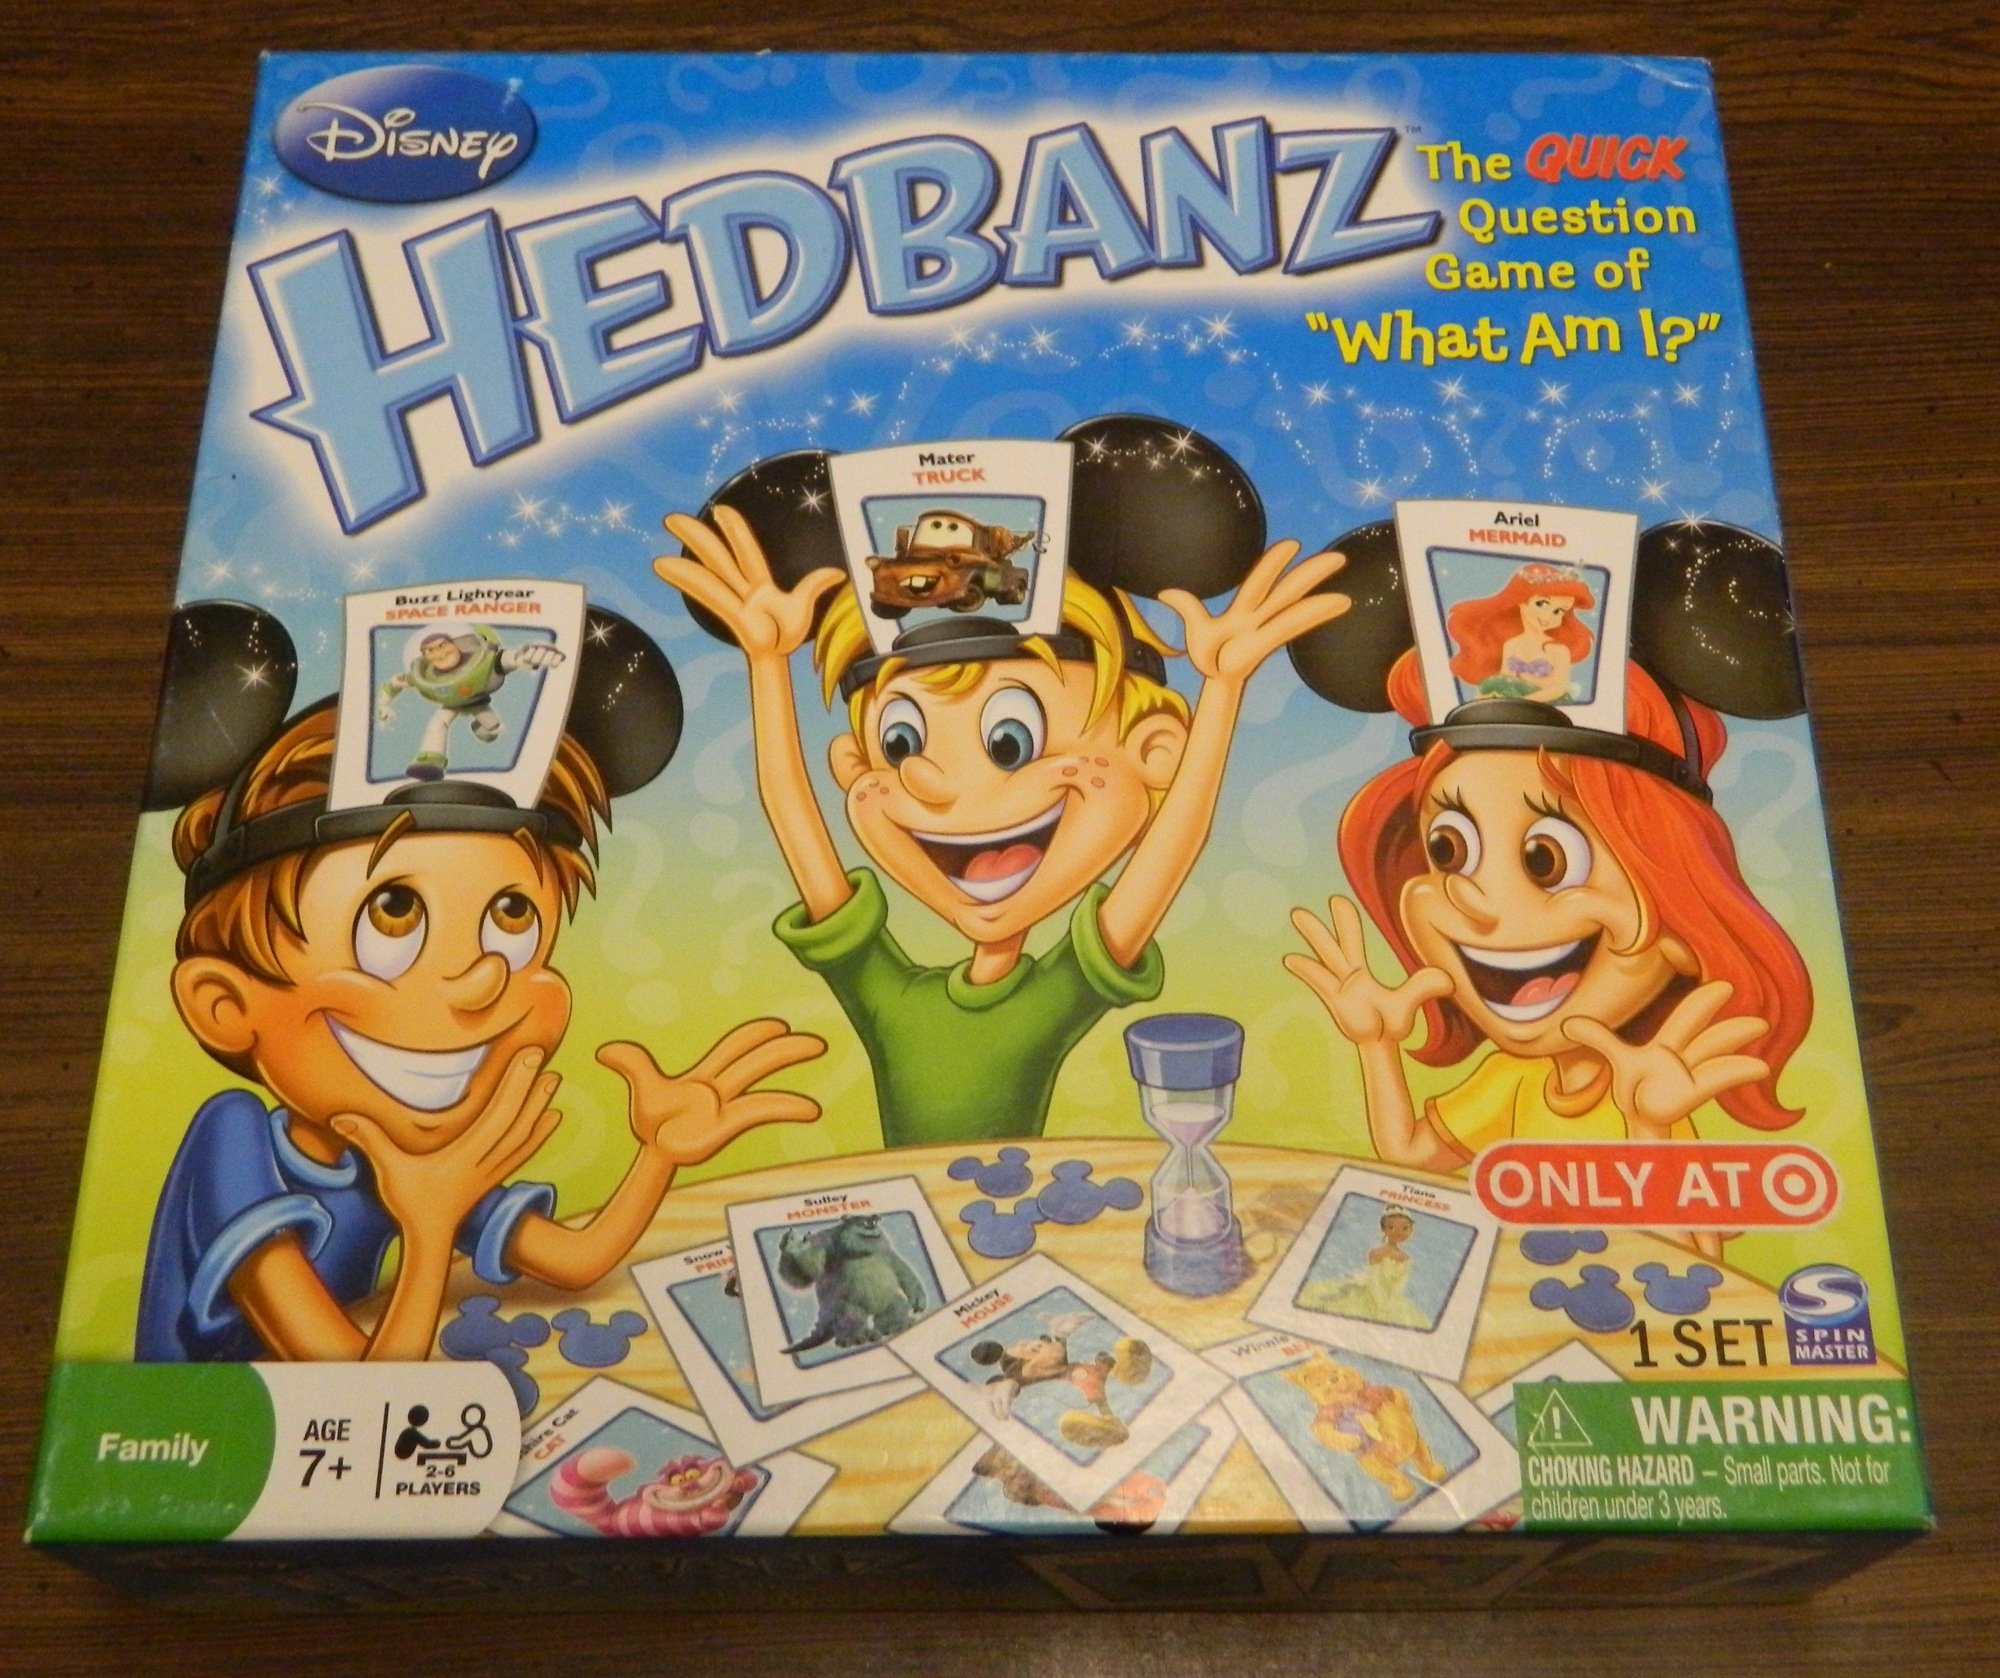 Disney Hedbanz Board Game Review and Rules